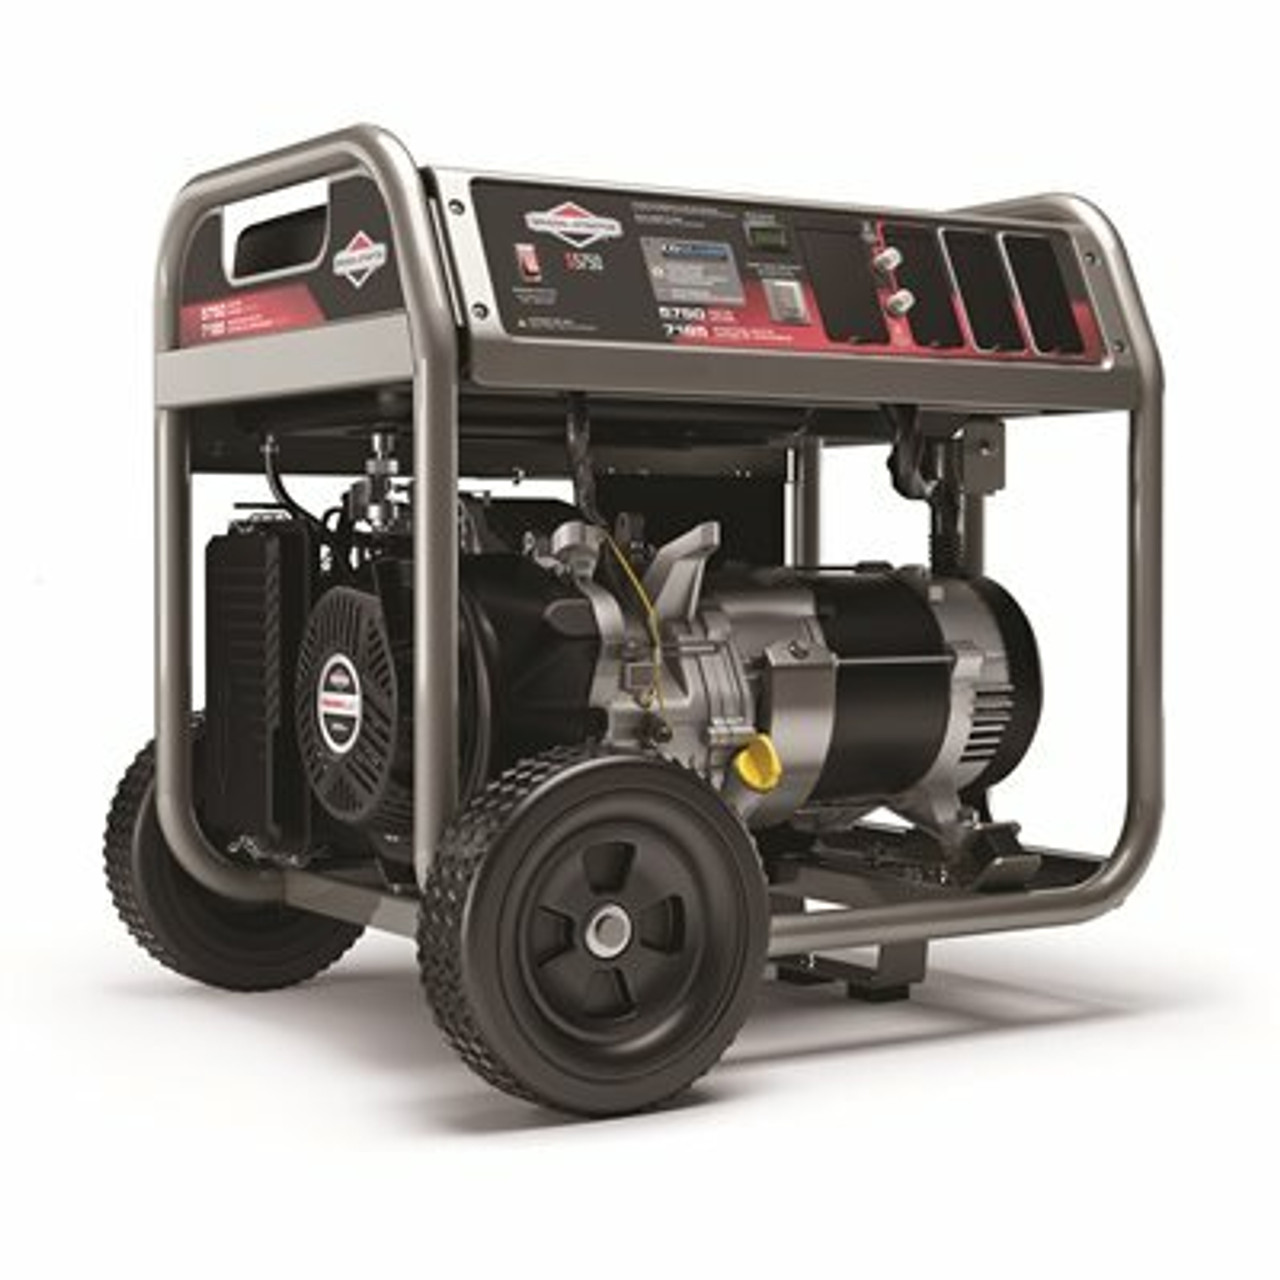 Briggs & Stratton 5,750-Watt Recoil Start Gasoline Powered Portable Generator With B&S Ohv Engine Featuring Co Guard